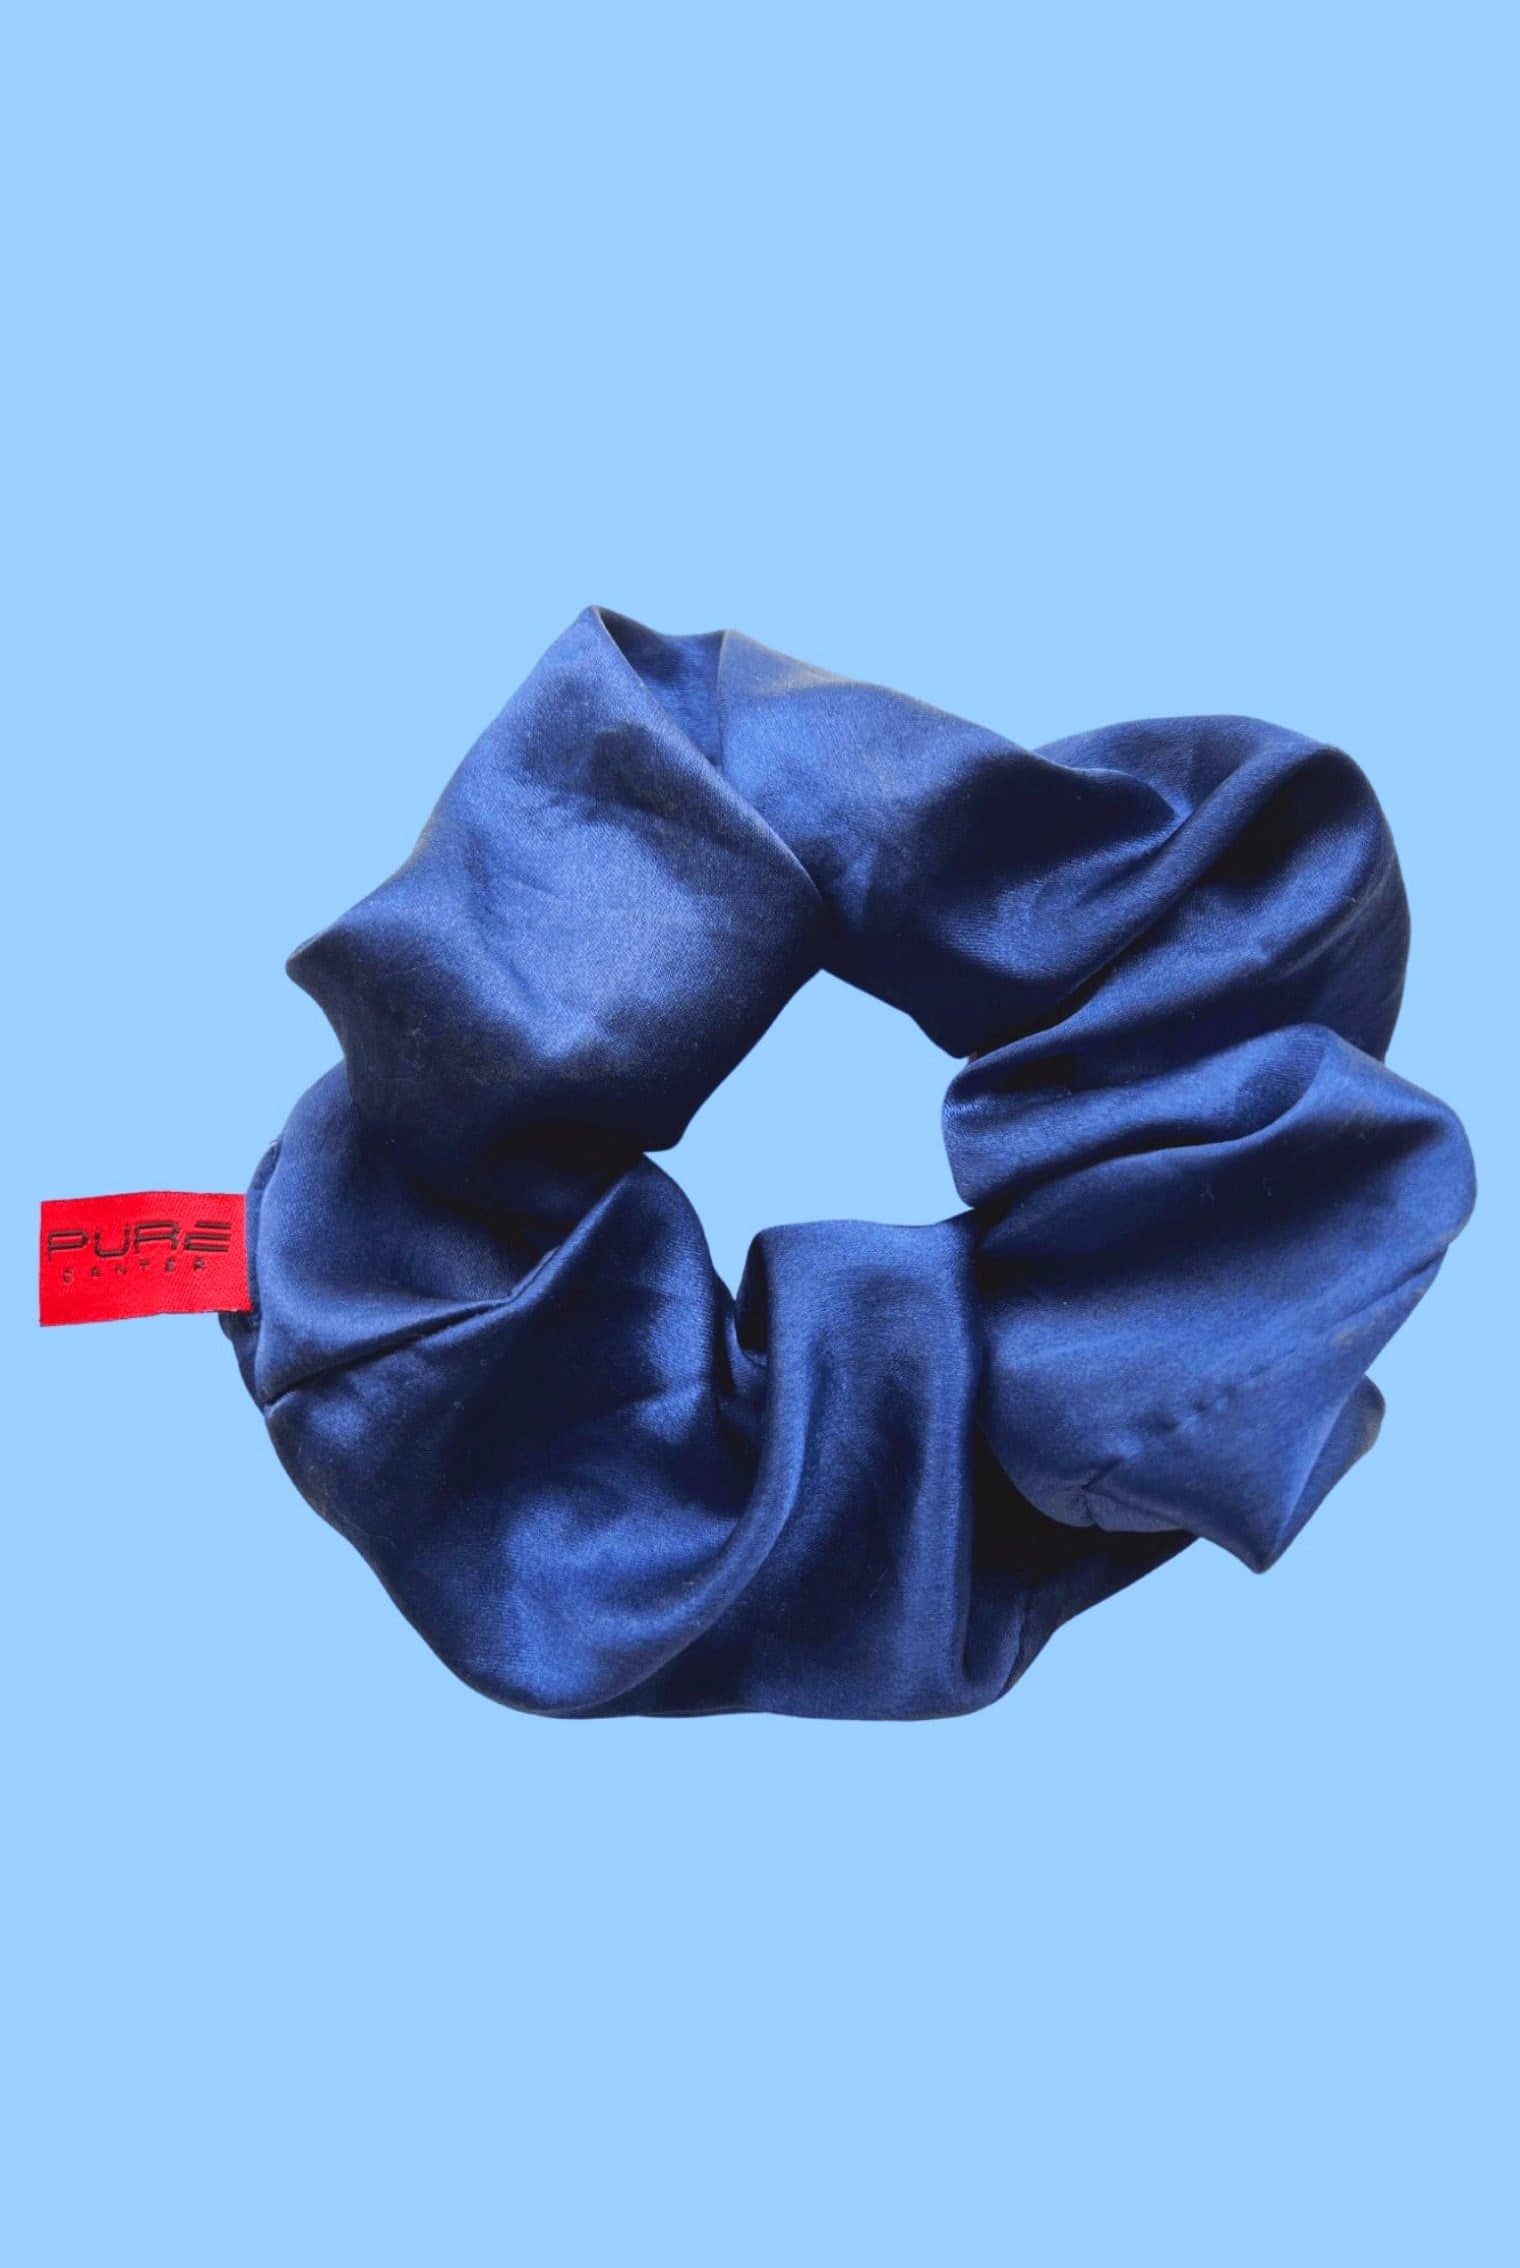 A blue satin Oversized Scrunchie is displayed against a light blue background. The scrunchie, perfect for casual outings, features a red tag with the brand name "Pure Canter Pty Ltd" visible on it.